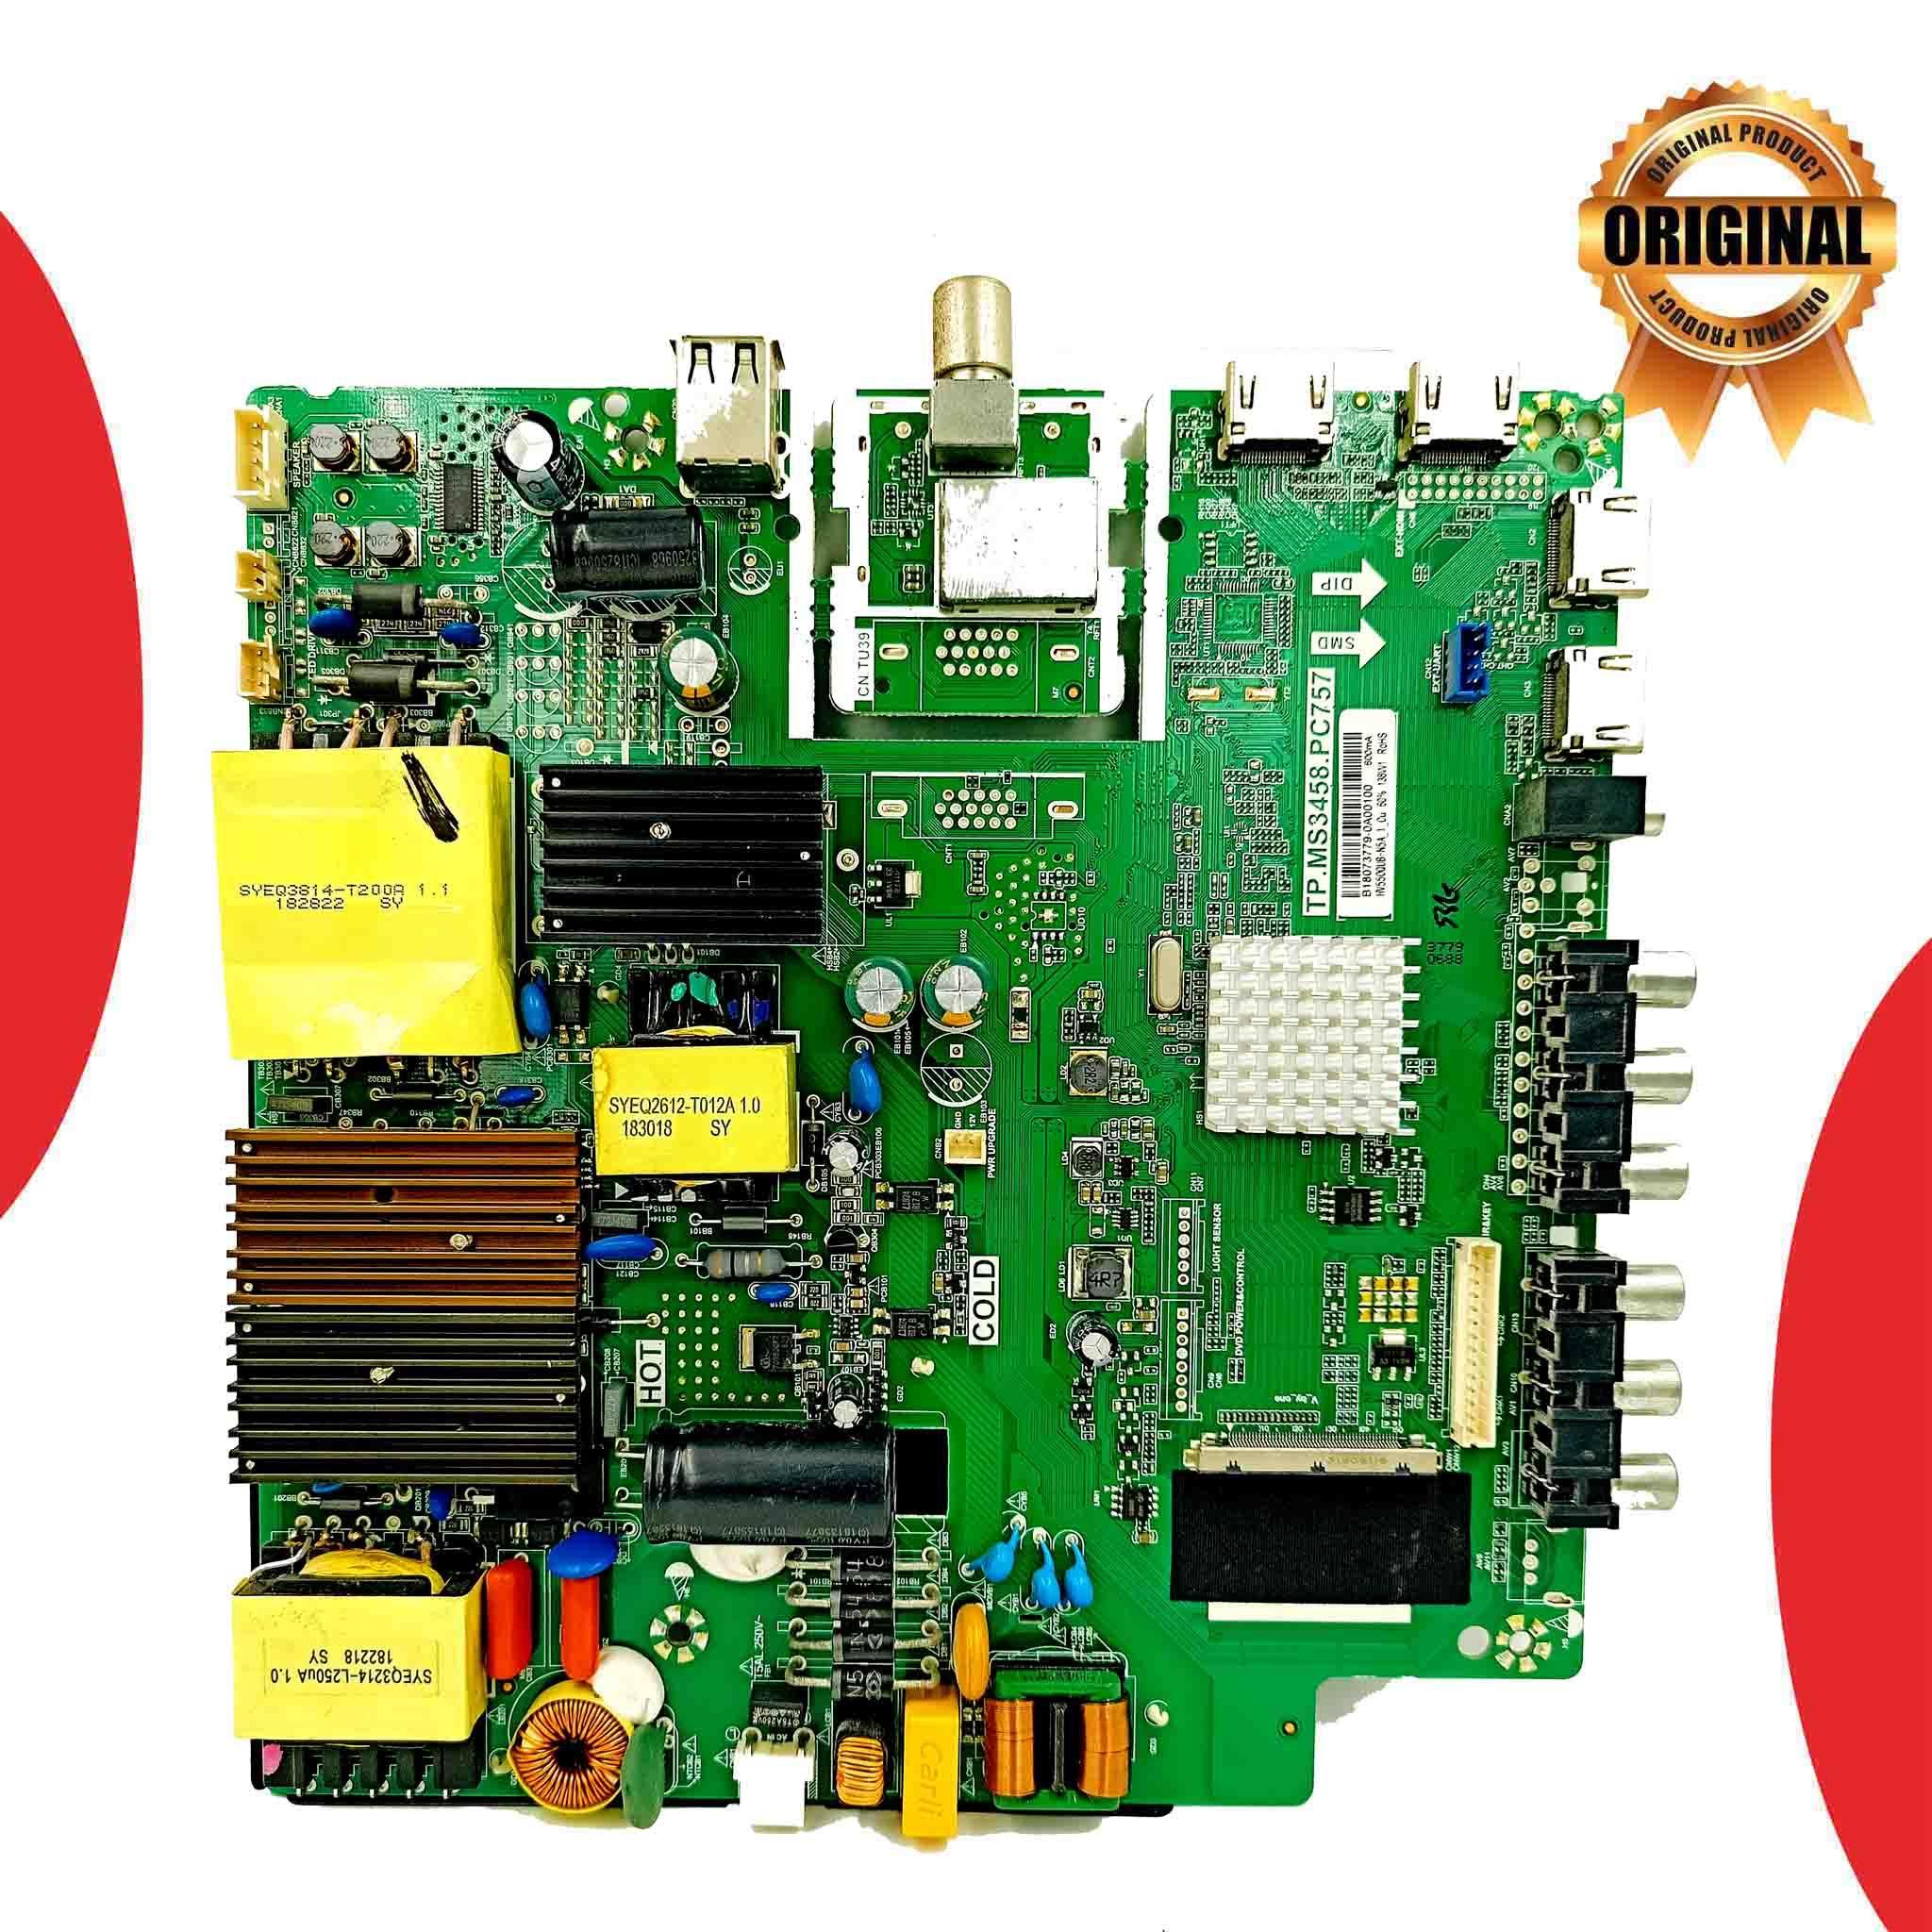 Reconnect 55 inch LED TV Motherboard for Model 55U6570 - Great Bharat Electronics